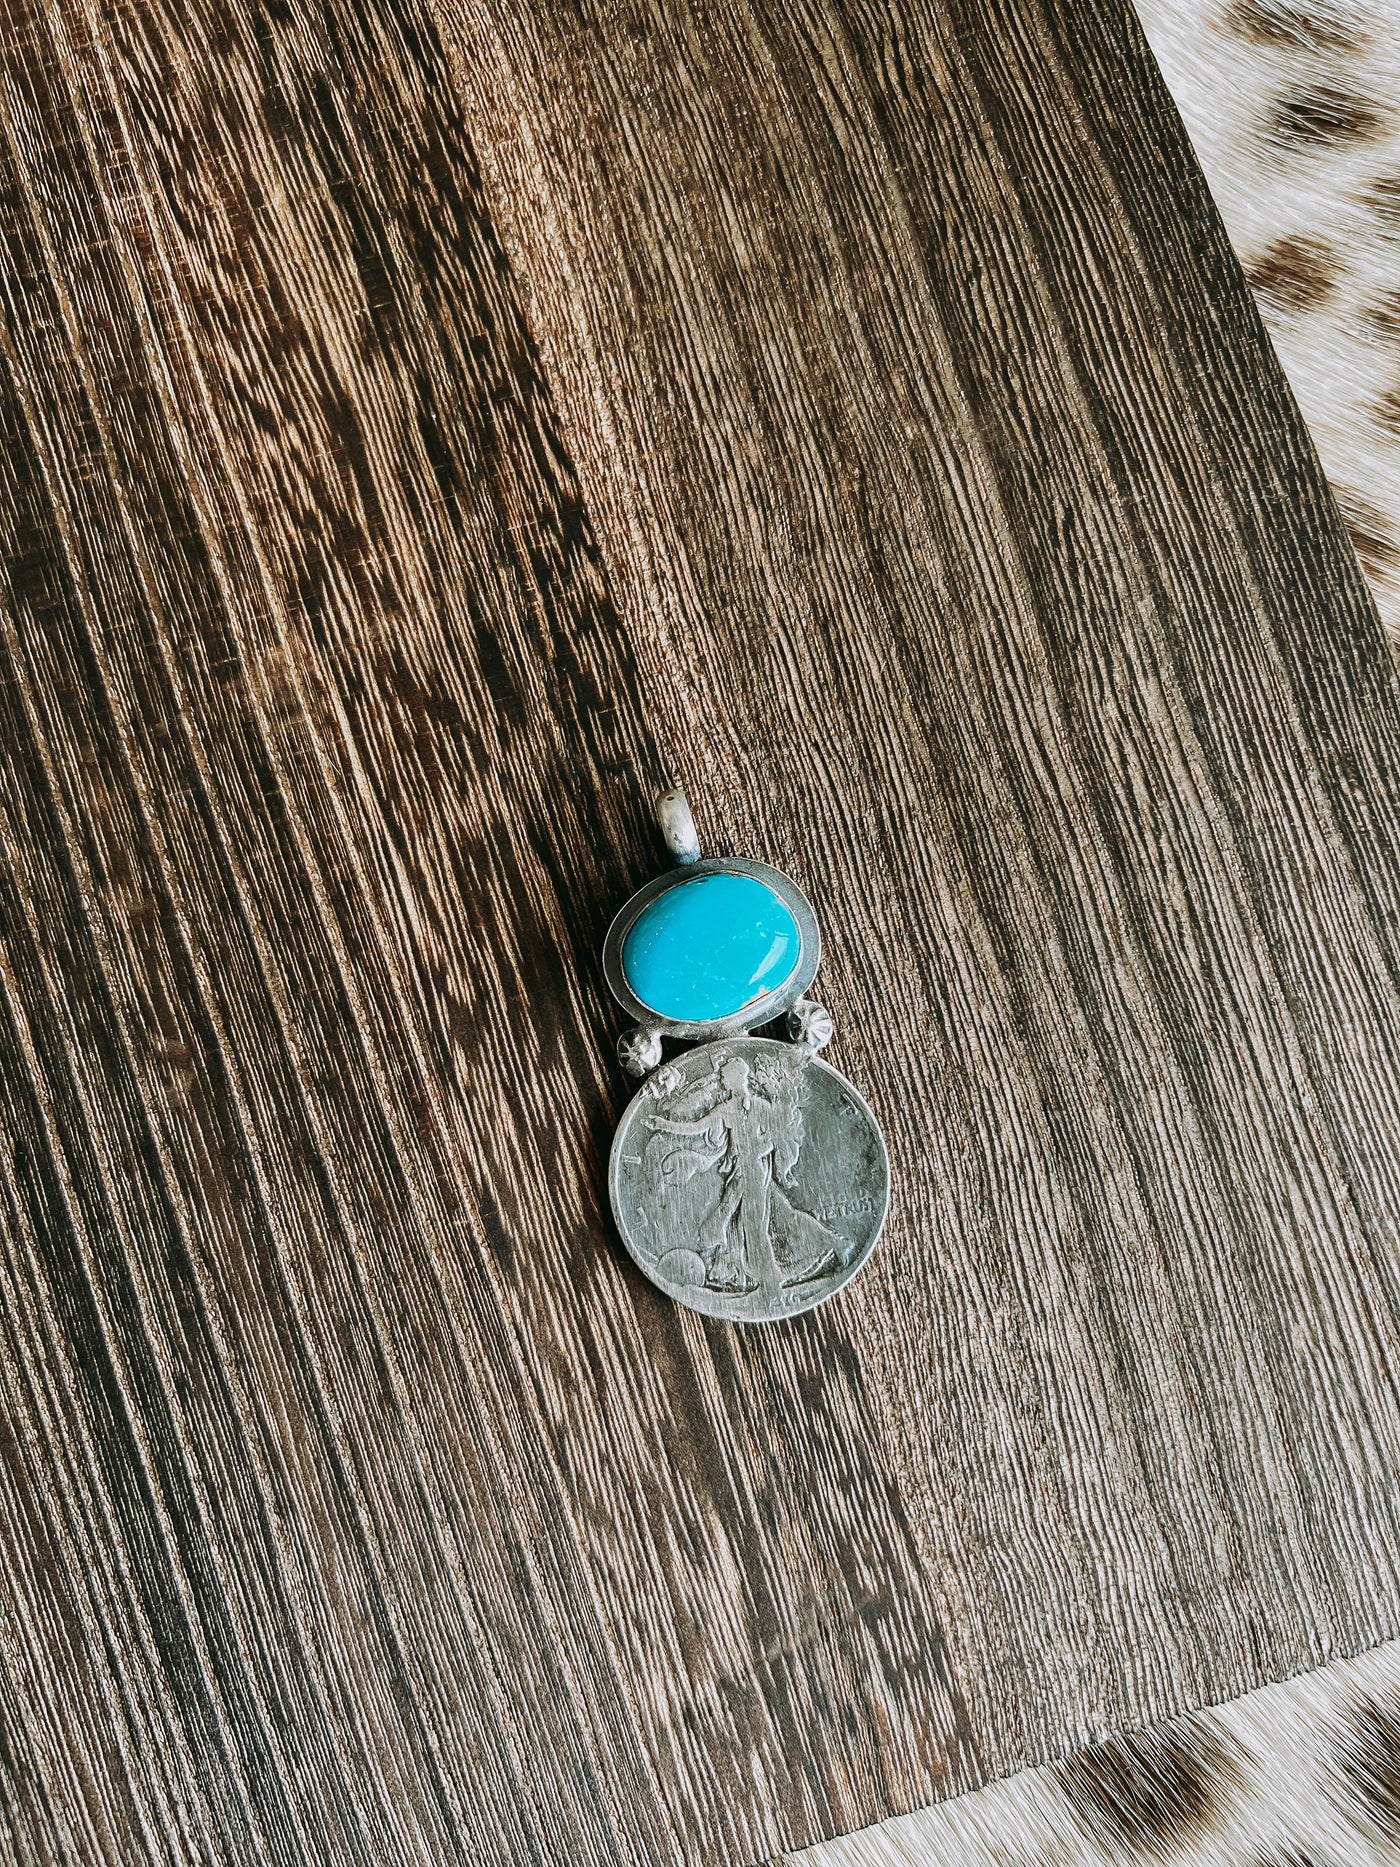 Tony Yazzie Silvercoin Pendent